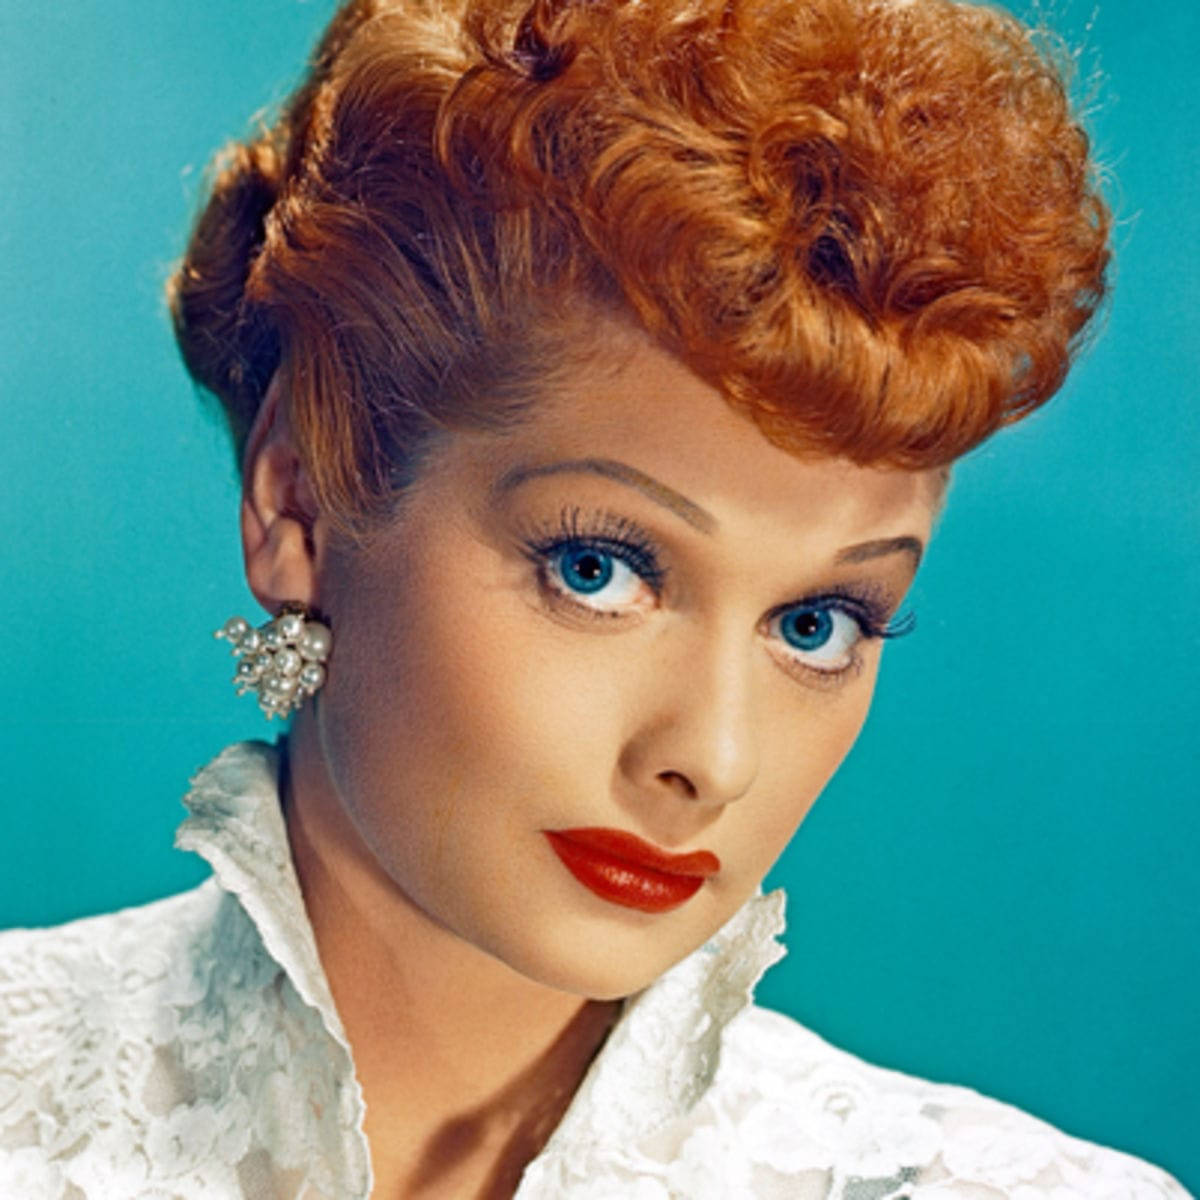 Timeless Beauty Of Comedy - A Portrait Of Lucille Ball Background